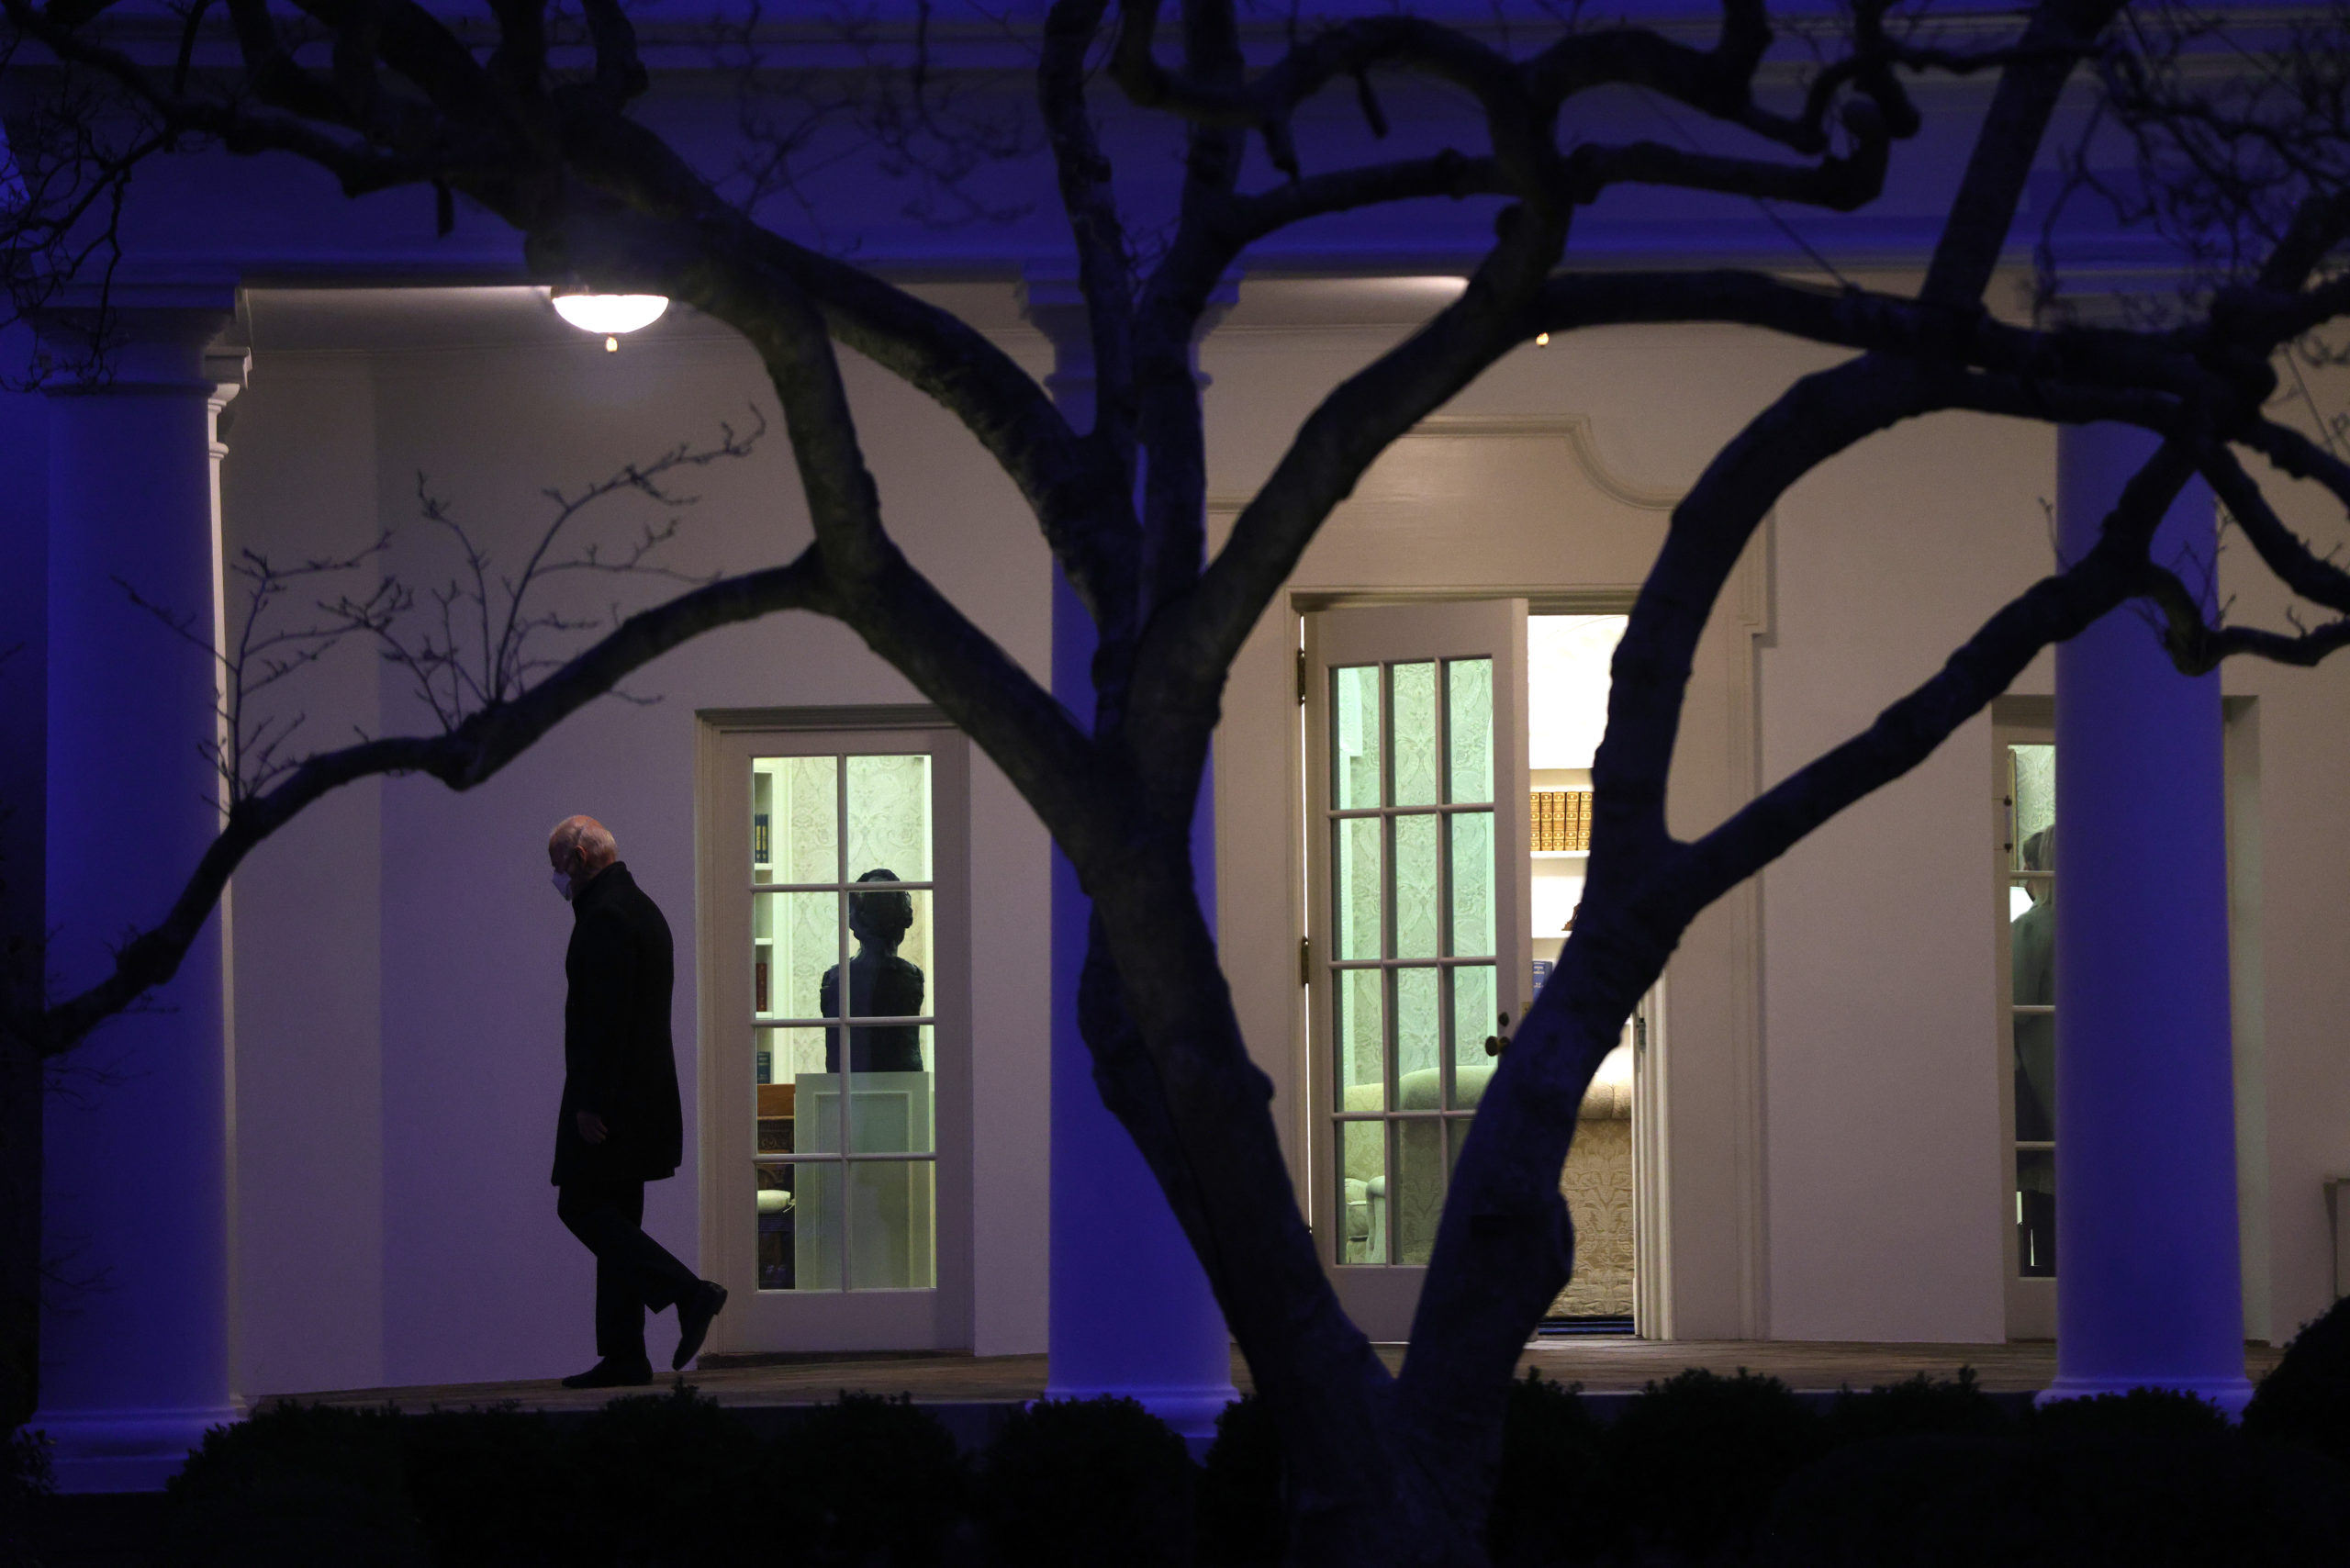 WASHINGTON, DC - FEBRUARY 12: U.S. President Joe Biden leaves the Oval Office prior to a Marine One departure from the South Lawn of the White House February 12, 2021 in Washington, DC. President Biden is spending his weekend at Camp David. (Photo by Alex Wong/Getty Images)